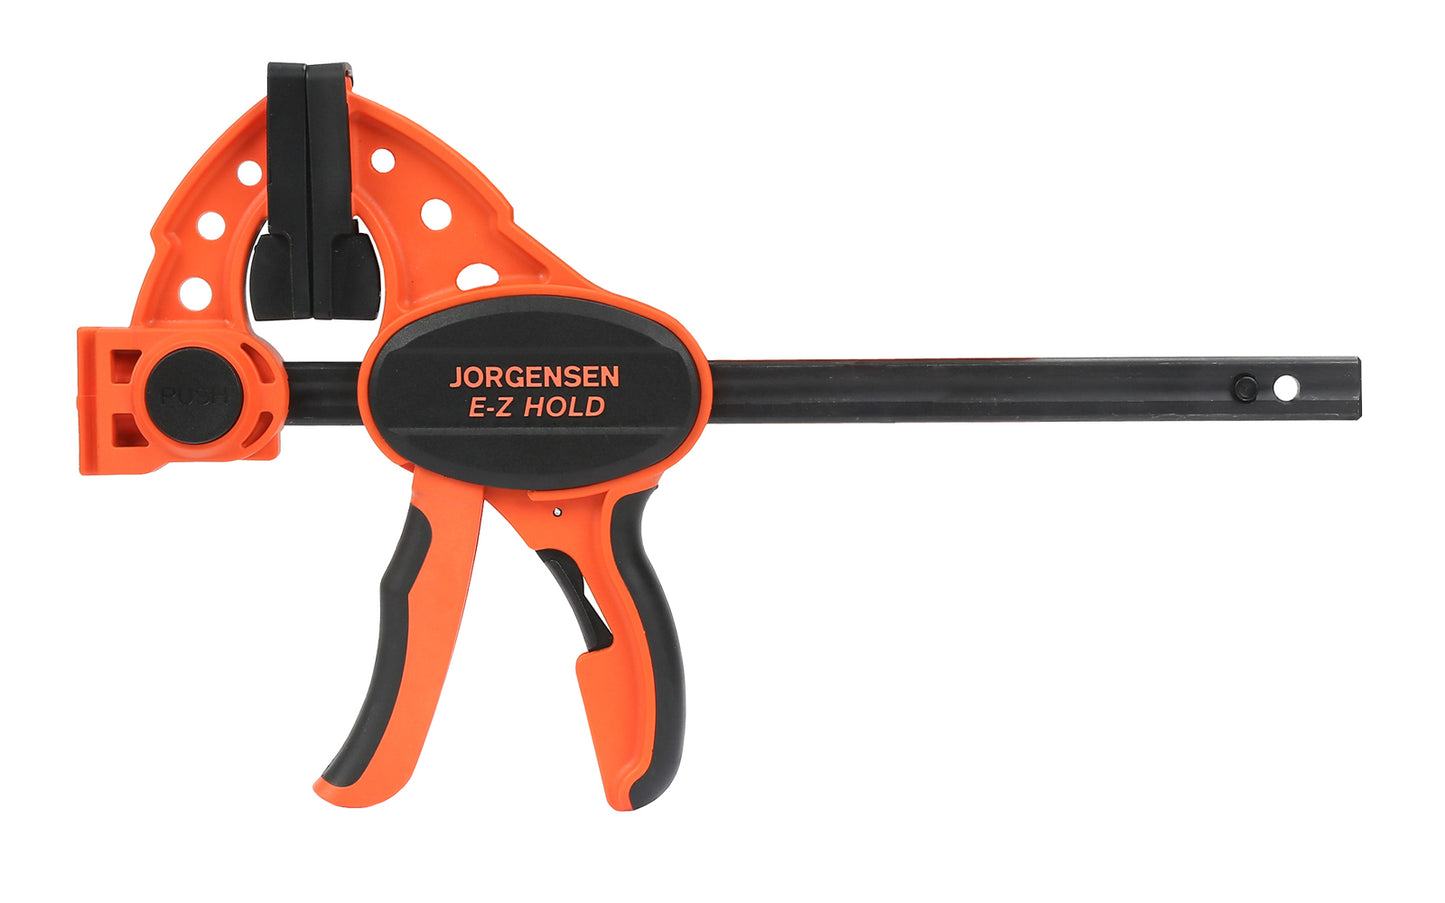 Jorgensen "Ez-Hold" Medium-Duty / Spreader Expandable Clamp ~ 6" Opening - Model No. 33406 - Comfortable one-hand clamping - Reversible Jaw converts clamp to spreader - 6" max opening - 300 lbs. clamping pressure